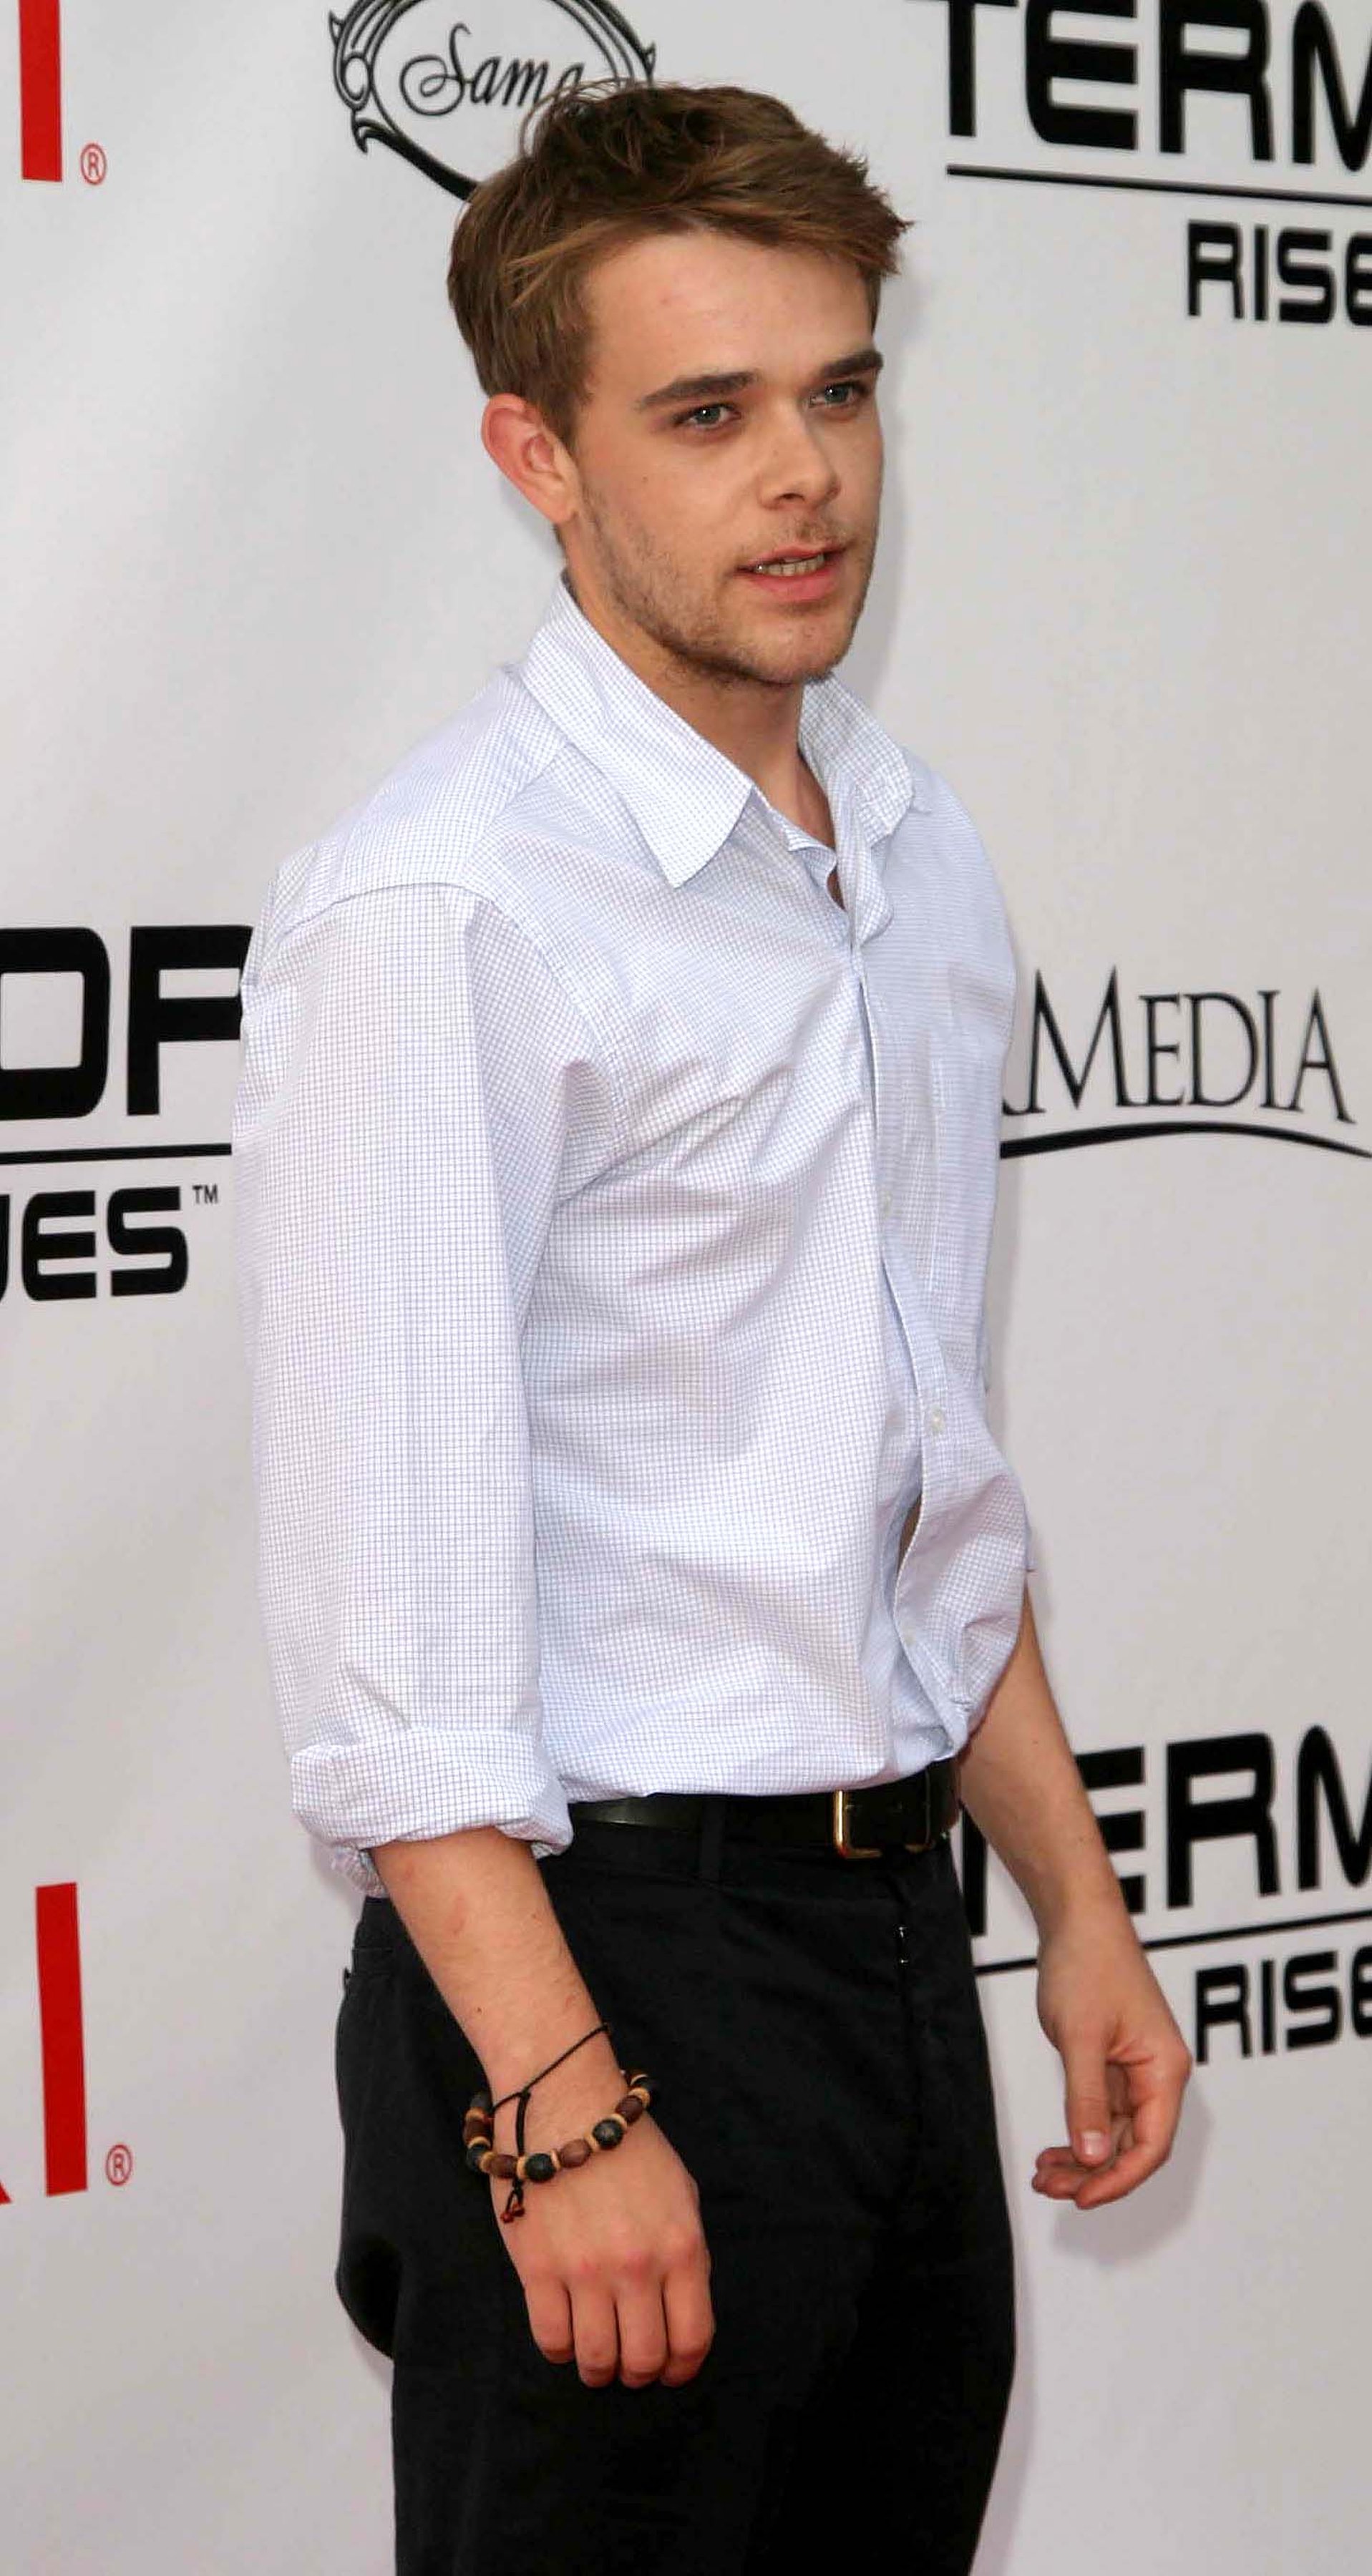 Nick Stahl at the Terminator 3: Rise of the Machines - Game Launch party at the Raleigh Studios on May 12, 2012 in Los Angeles, California | Photo: Shutterstock